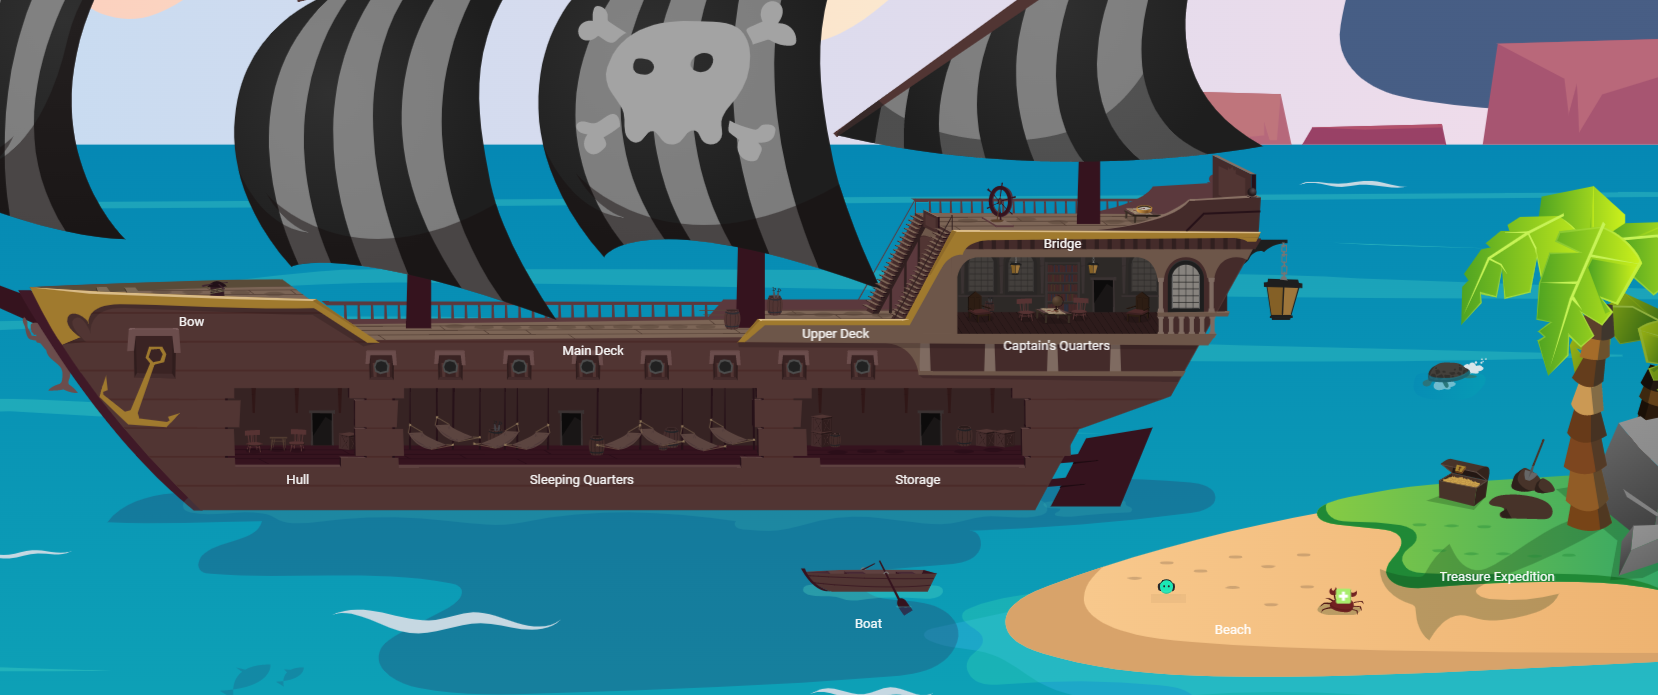 Pirate_Ship.png